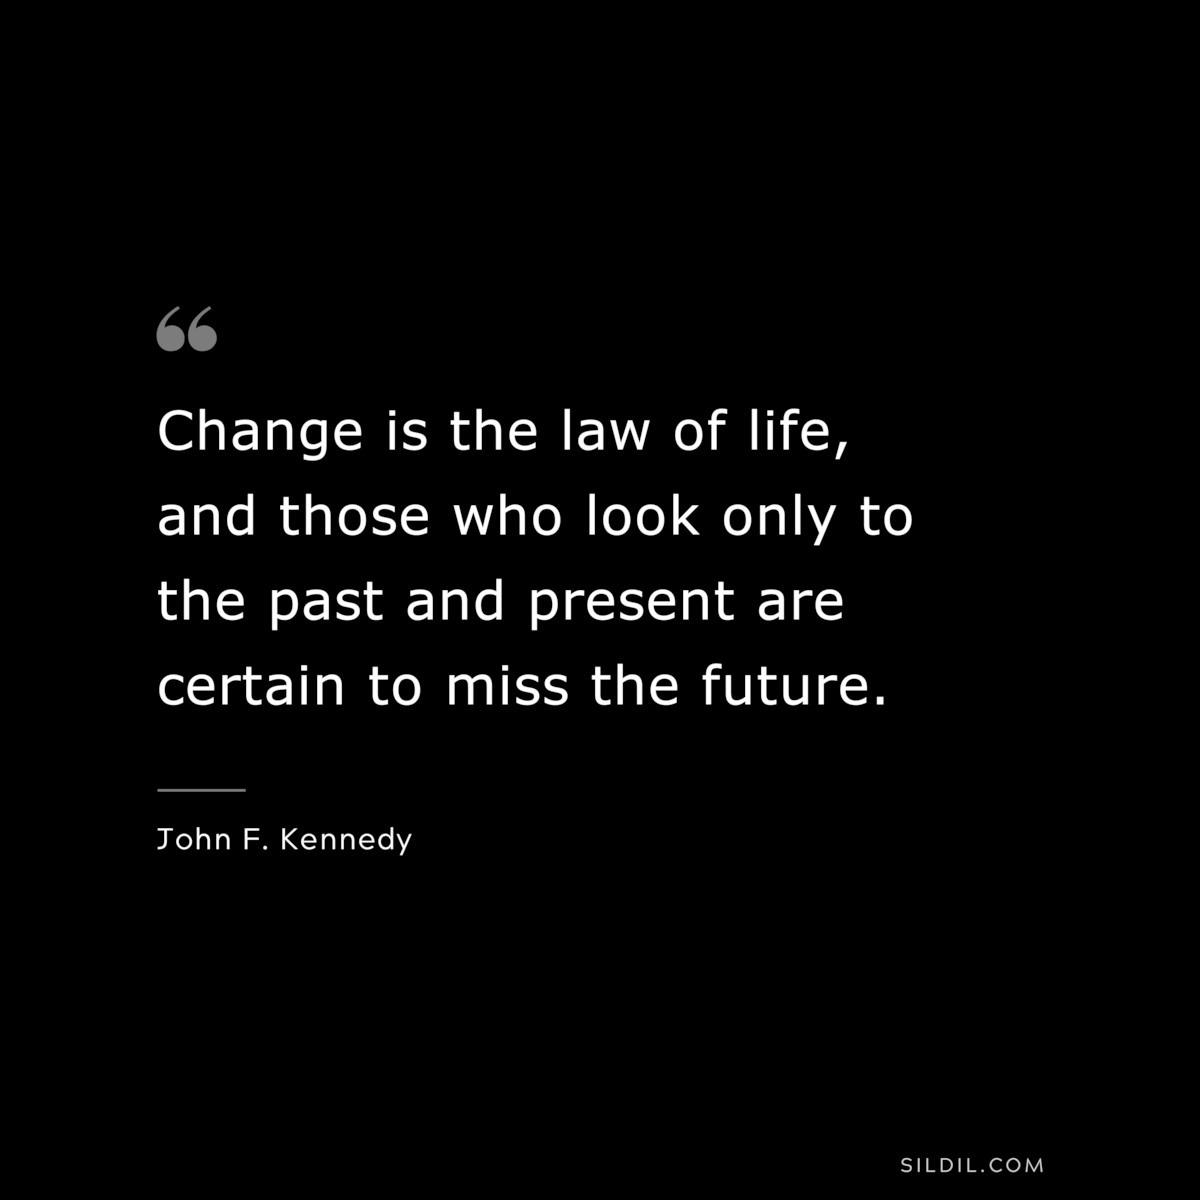 Change is the law of life, and those who look only to the past and present are certain to miss the future. ― John F. Kennedy